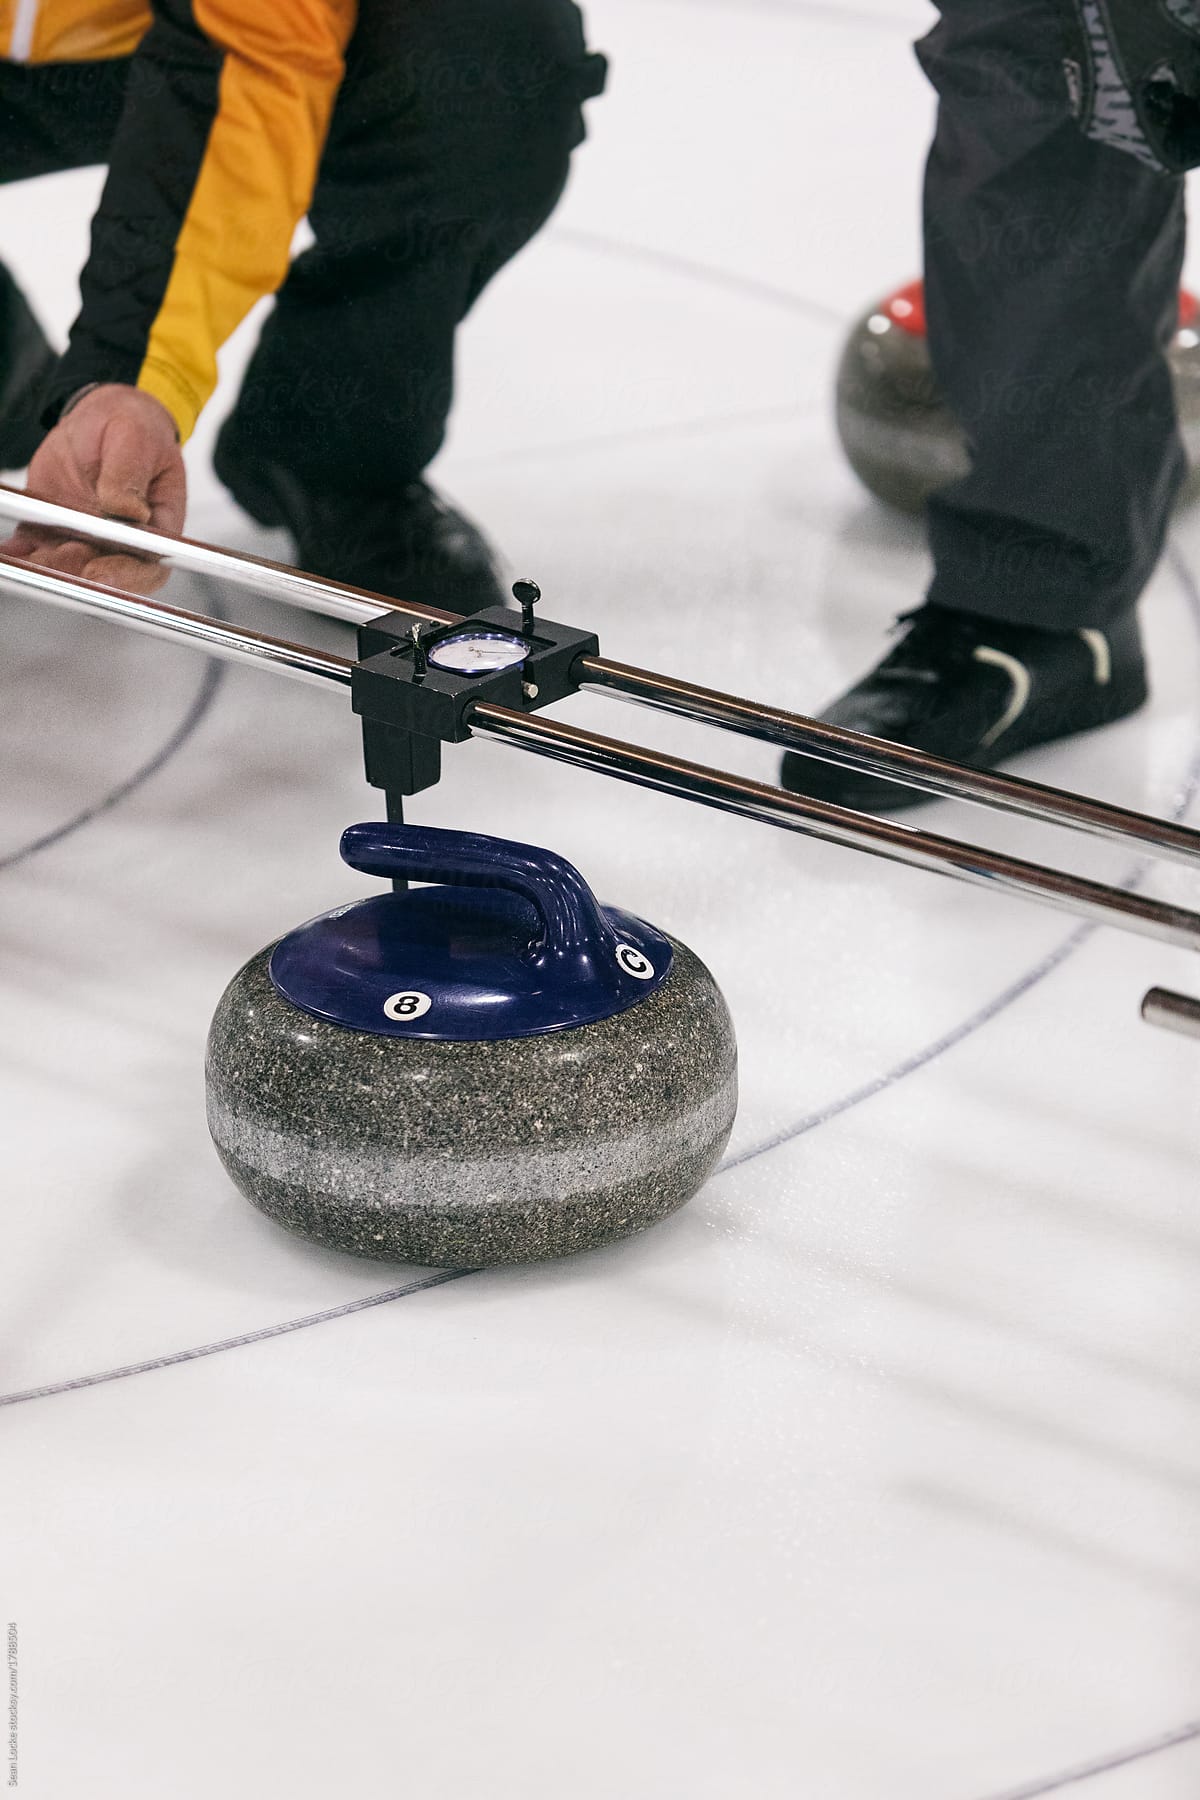 Curling: Players Using Device To Measure Closer Stone